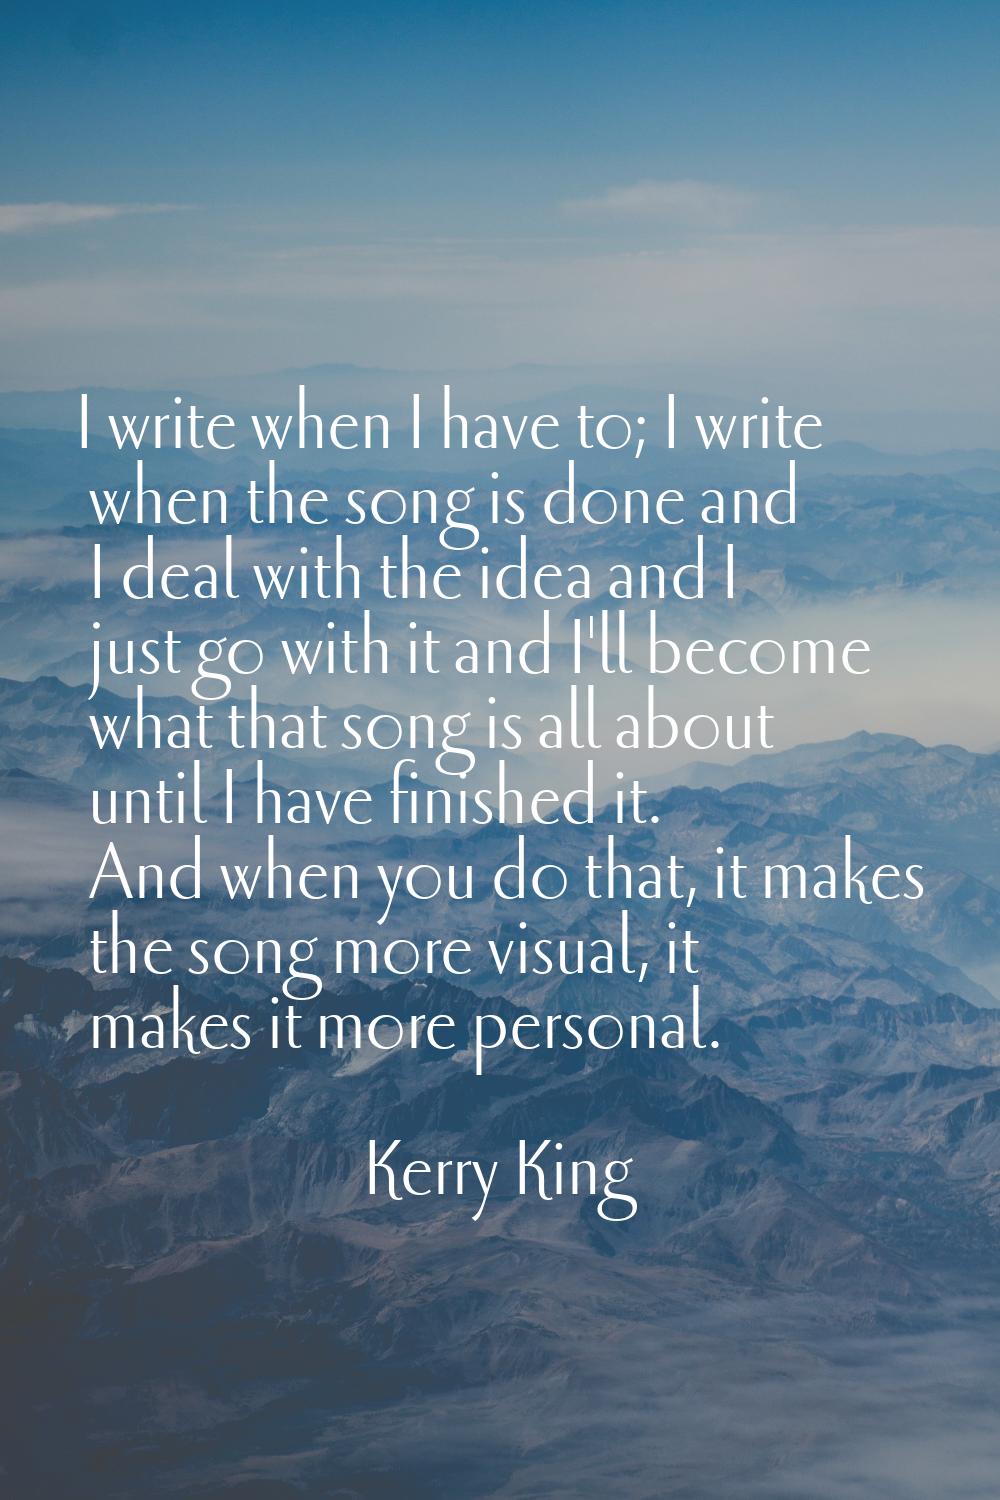 I write when I have to; I write when the song is done and I deal with the idea and I just go with i